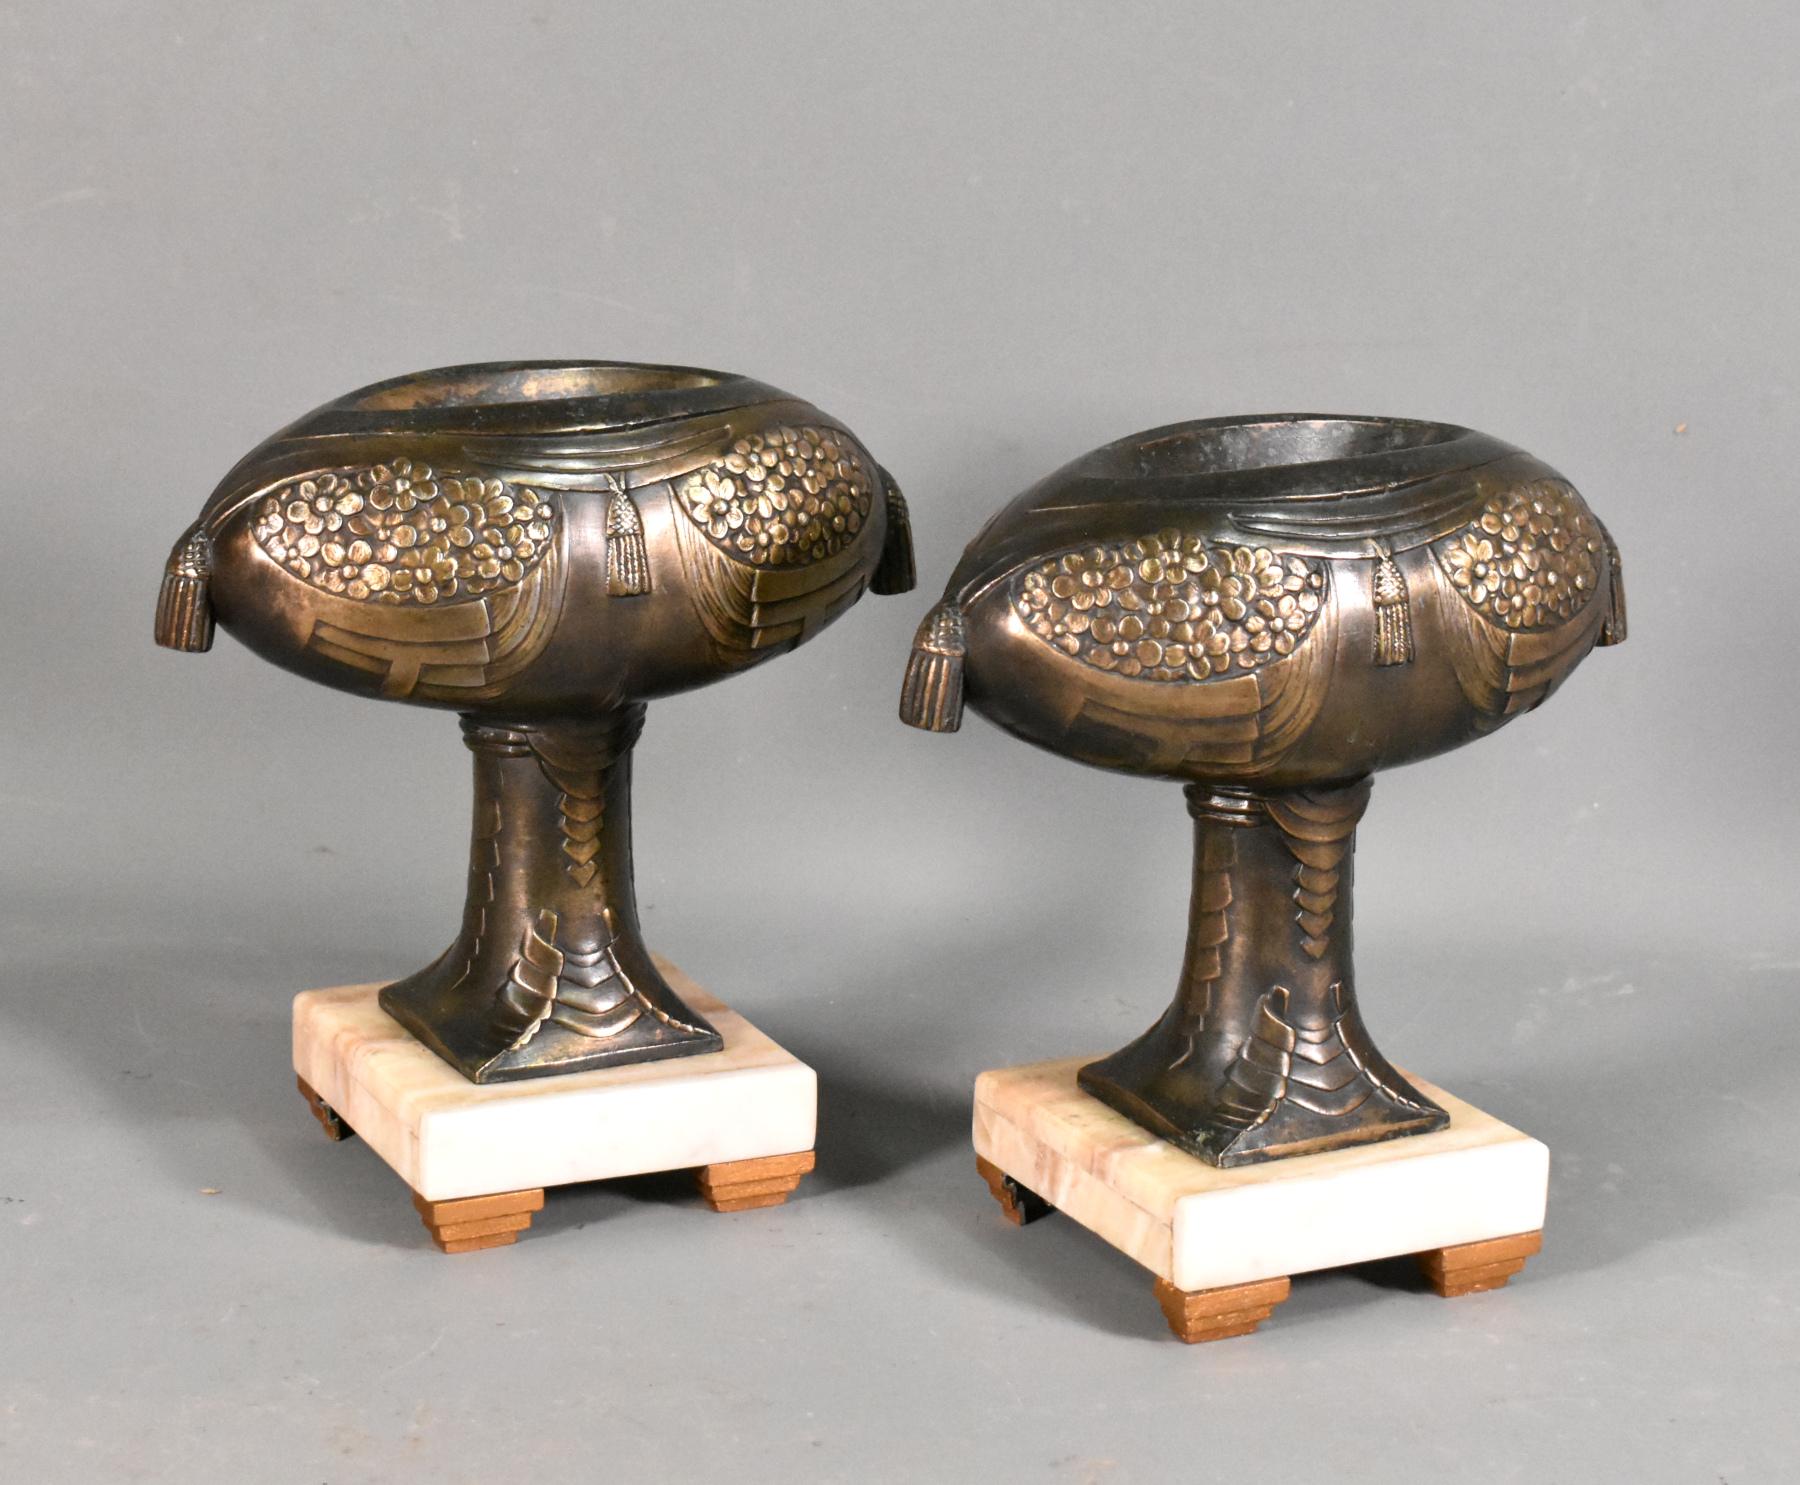 Pair of Decorative French Art Deco Garniture 

This unusual pair of garniture is decorated with floral motifs and swags of the Art Deco period. 

The garniture is of a good size with a dished bowl at the top. 

They stand on variegated marble